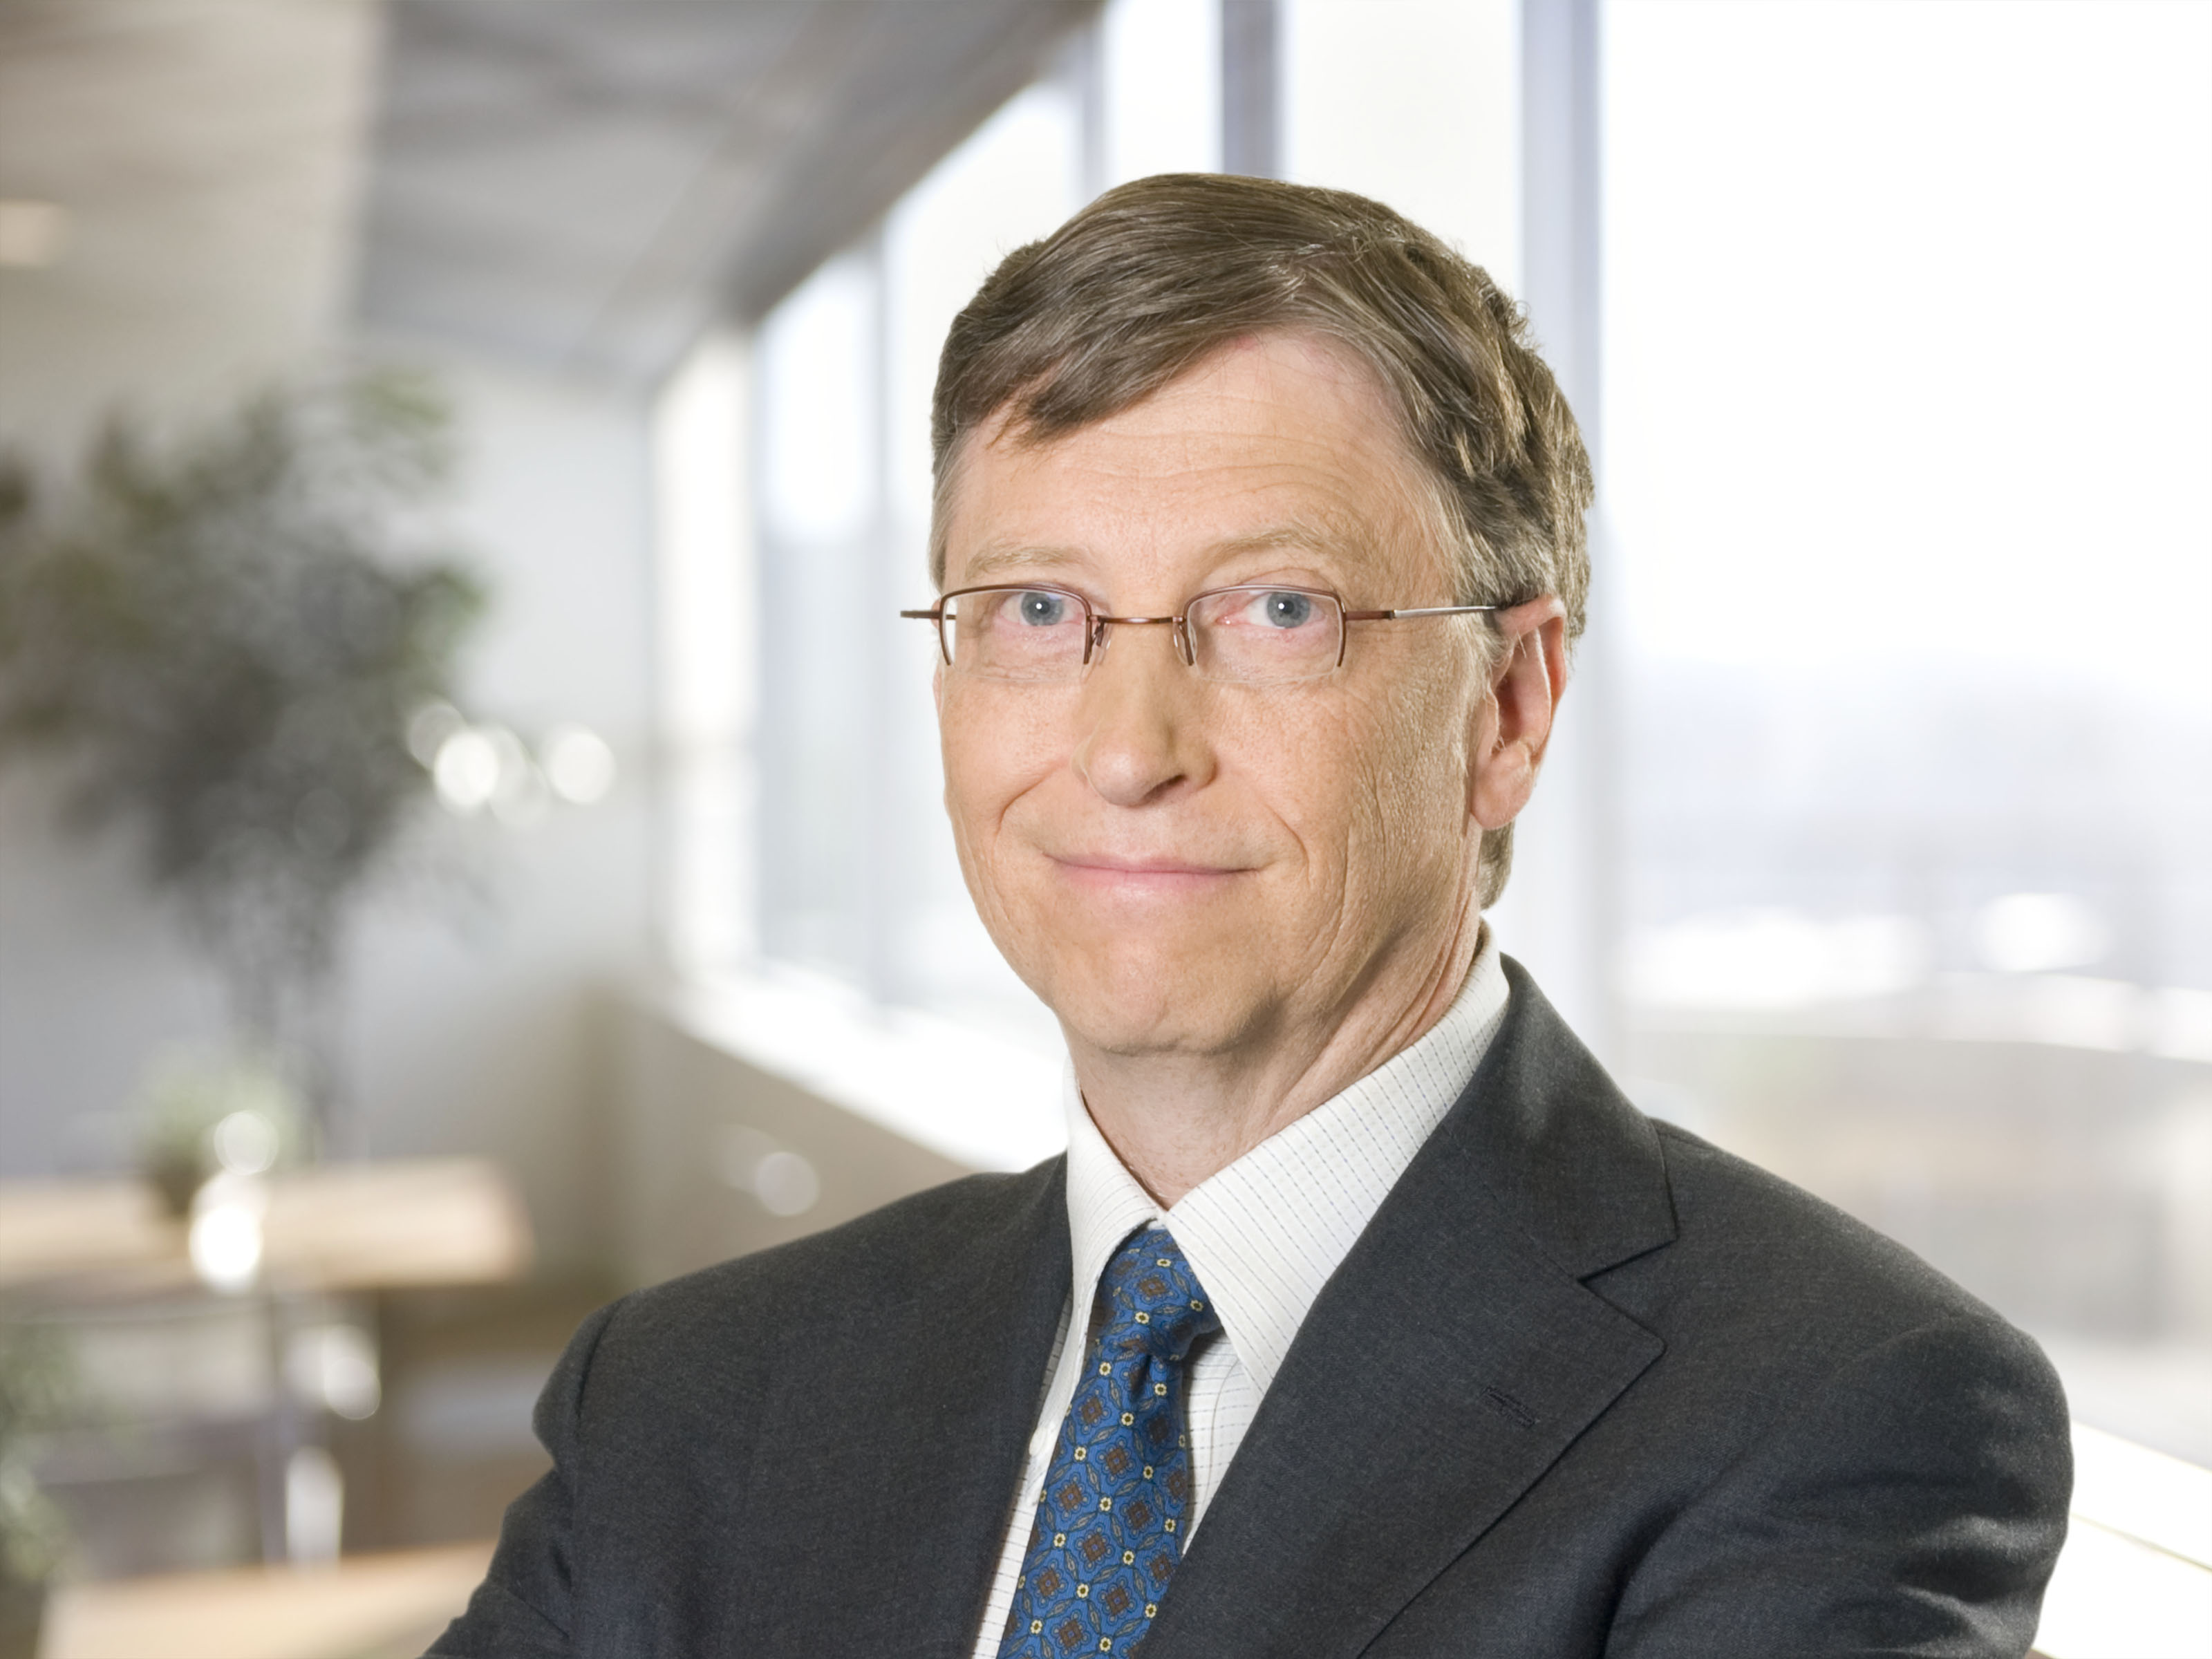 Bill Gates HD Wallpaper Amp Pictures